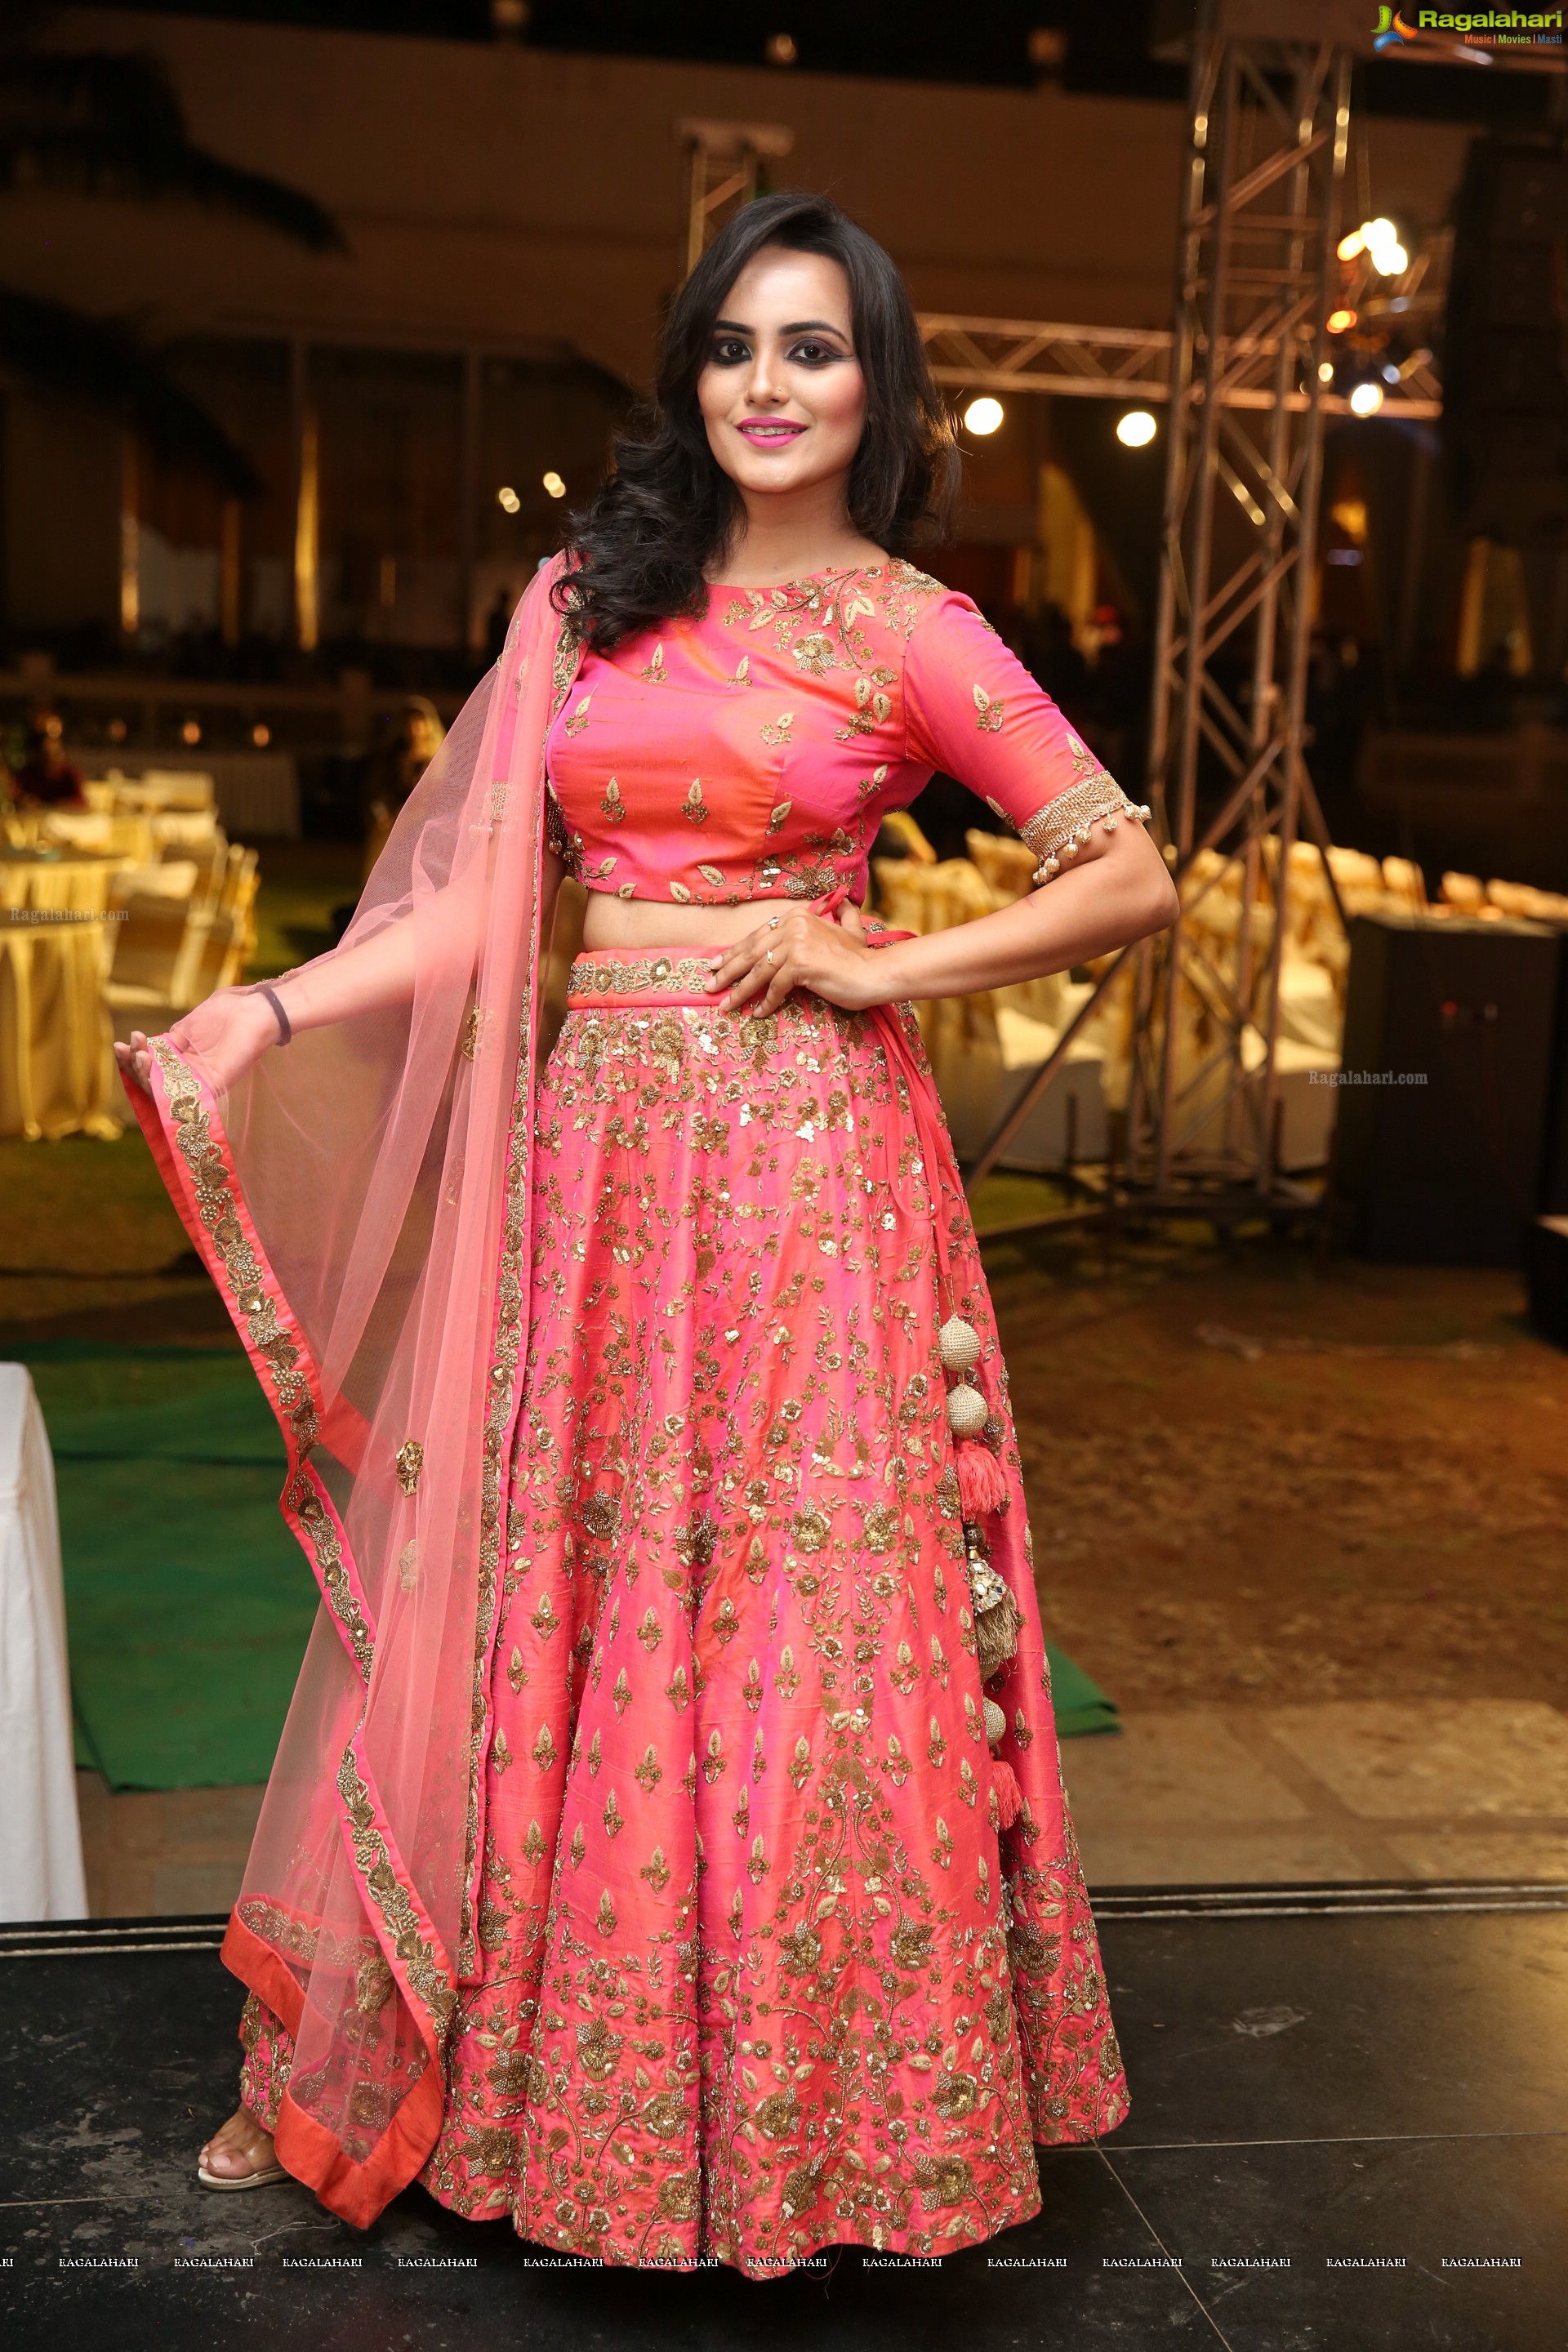 Mehak Anand @ India Glam Fashion Week Hyderabad  - HD Gallery